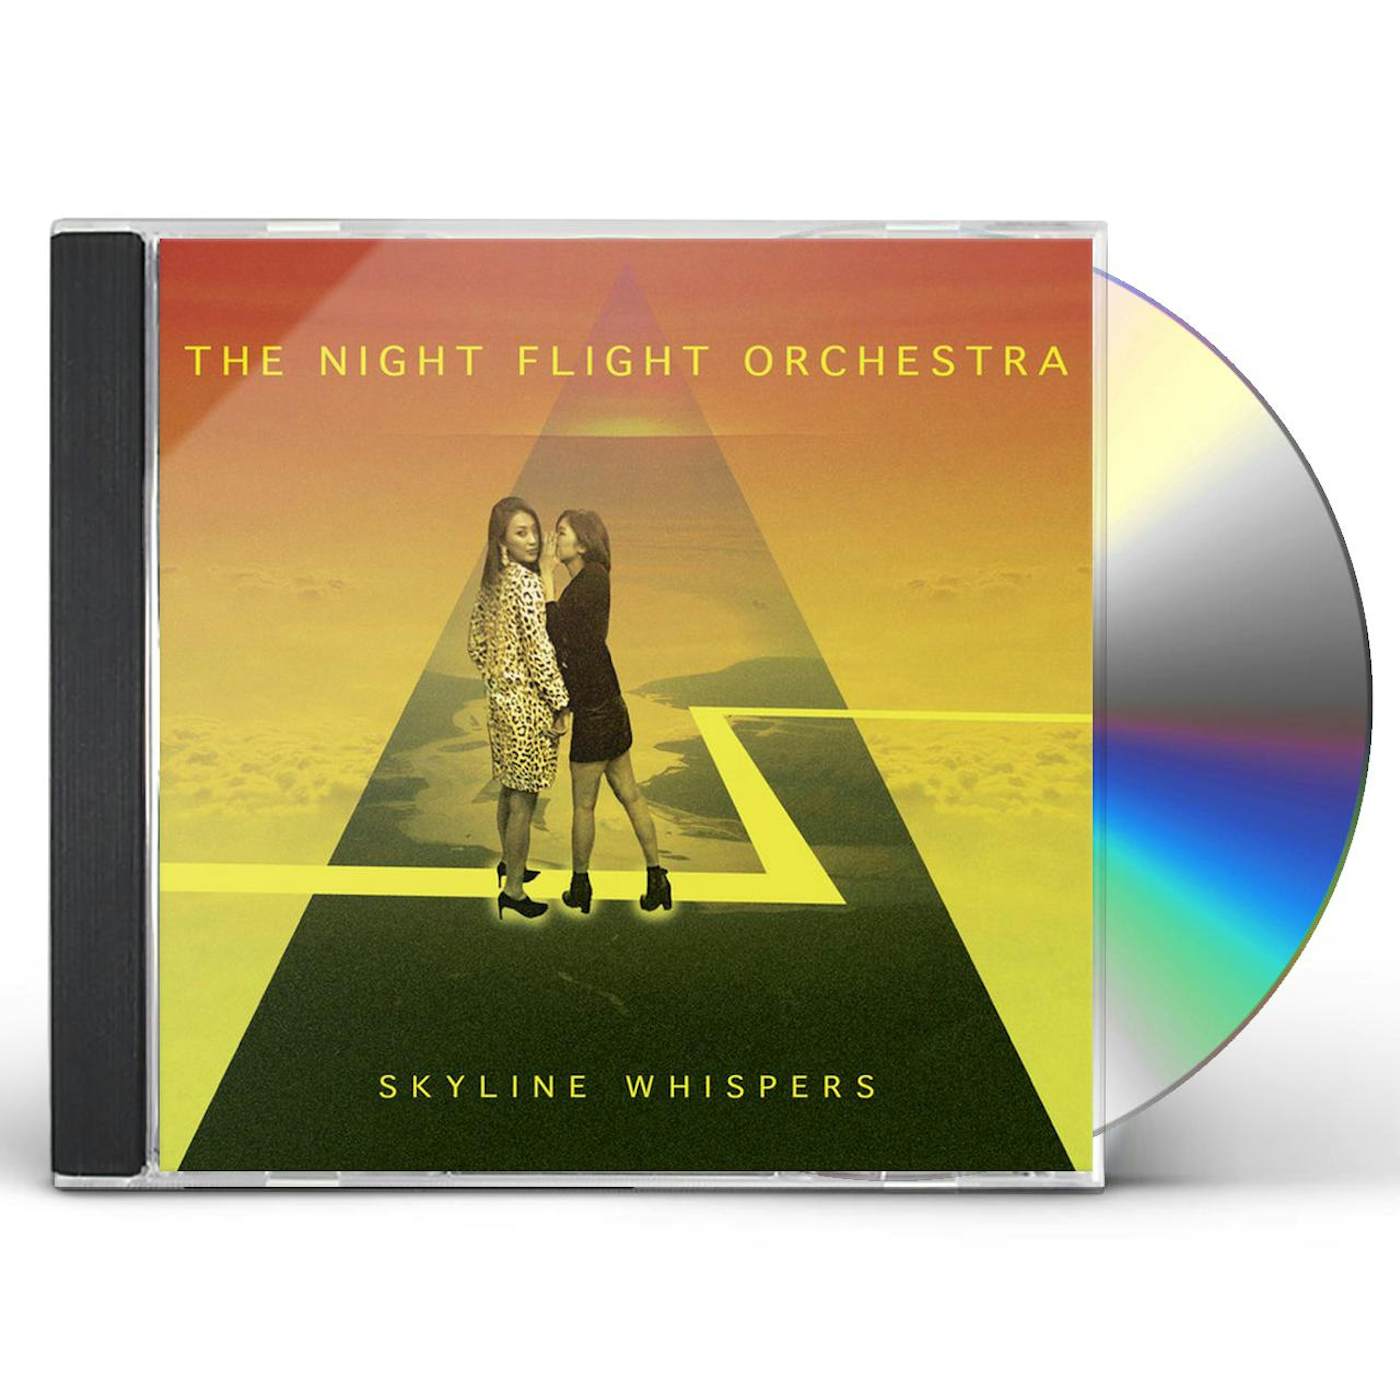 The Night Flight Orchestra SKYLINE WHISPERS CD